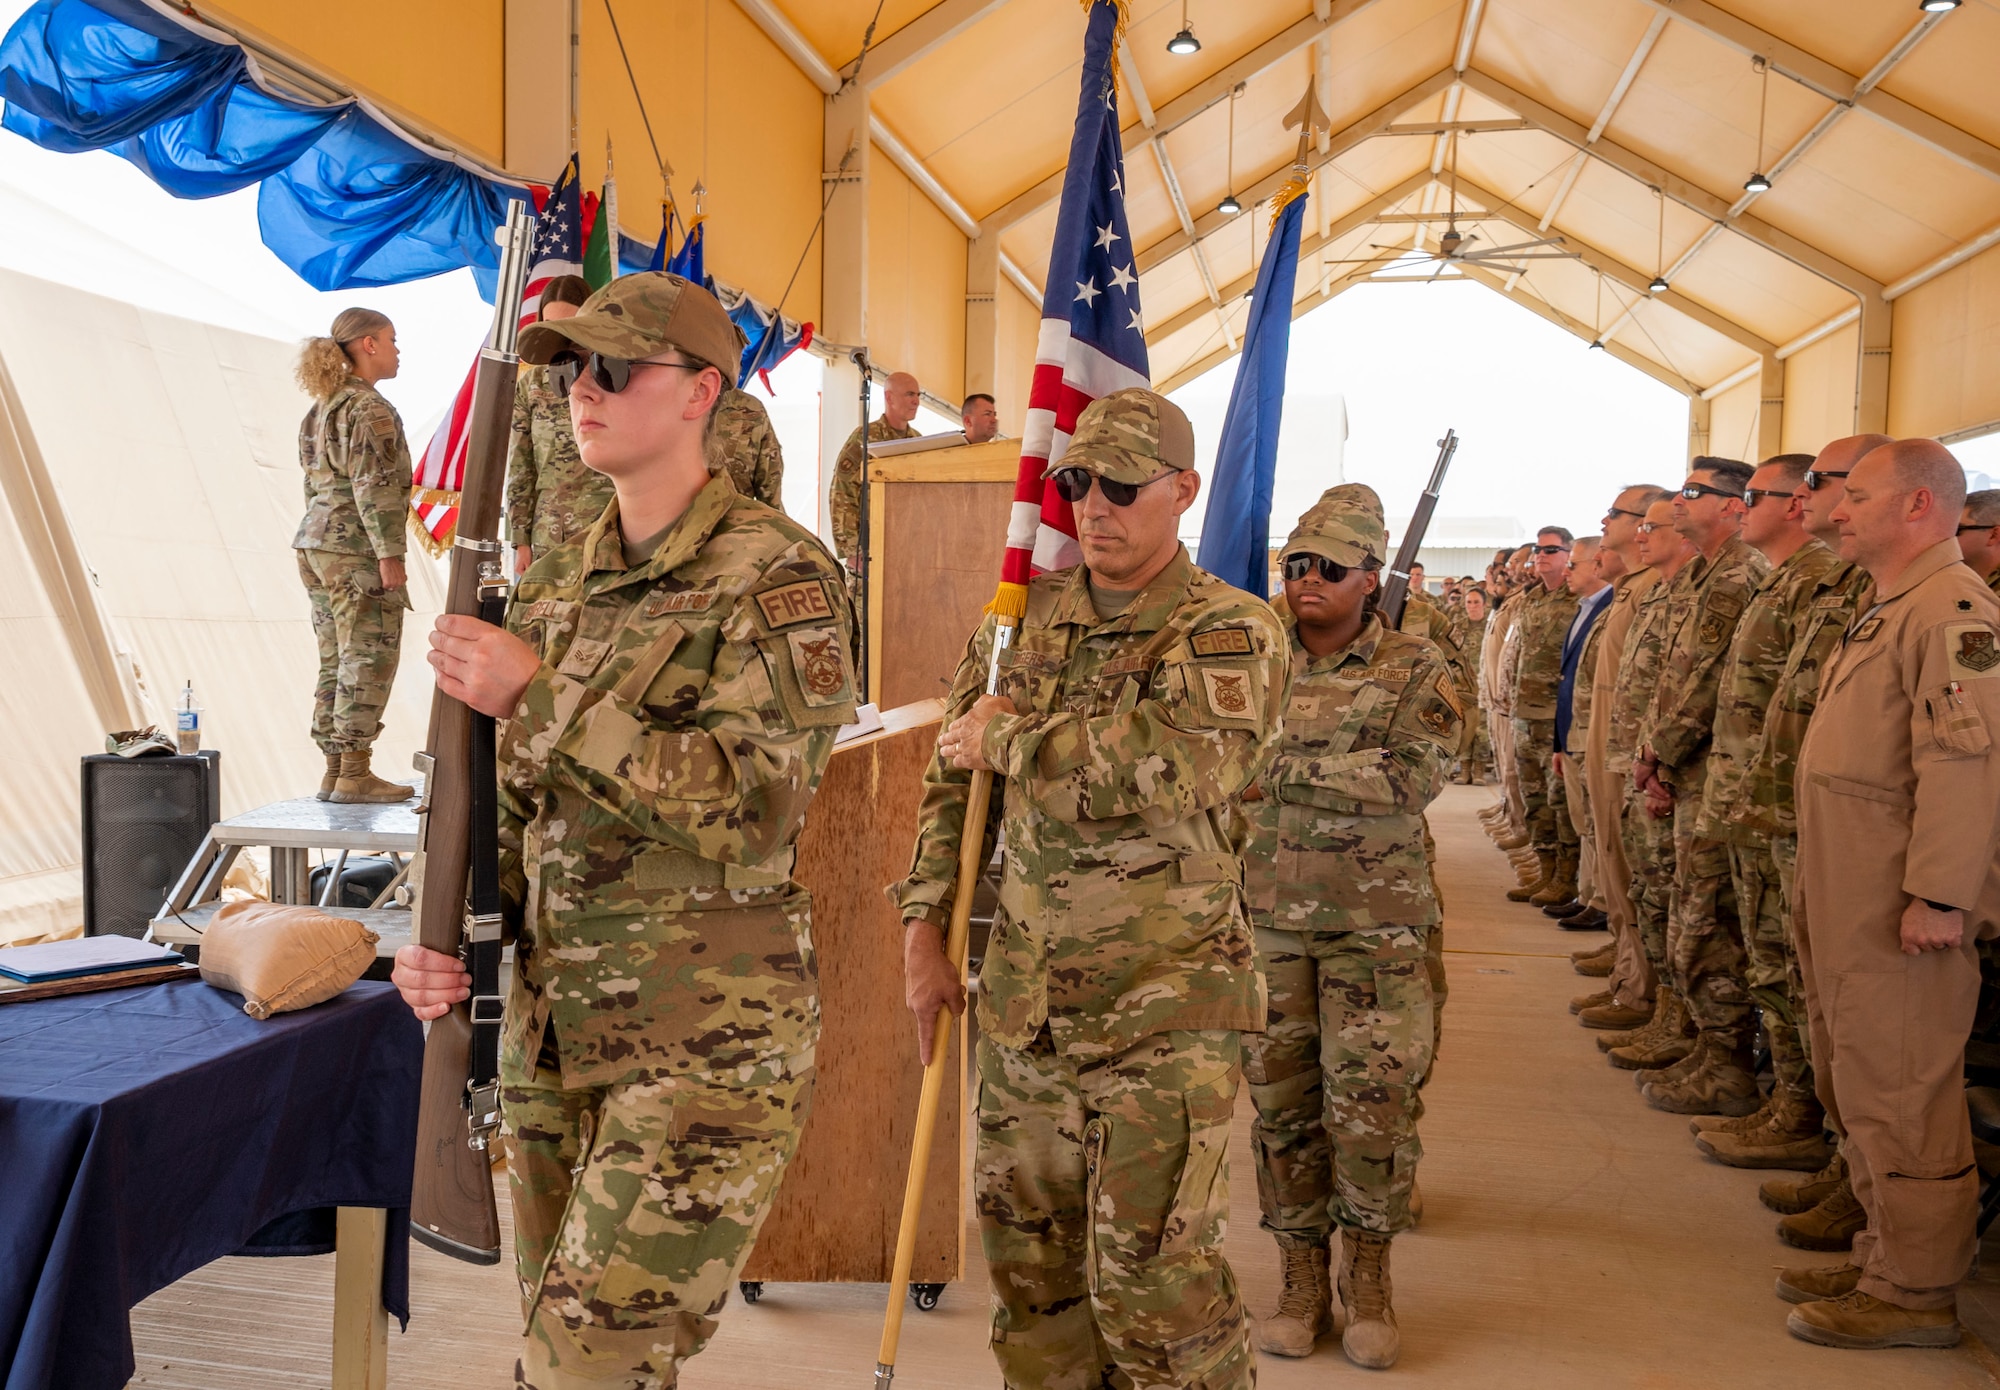 U.S. Airmen with the 378th Air Expeditionary Wing Honor Guard present colors during a change of command ceremony at Prince Sultan Air Base, Kingdom of Saudi Arabia, May 18, 2023. During the ceremony, Brig. Gen. William Betts relinquished command of the 378th AEW to Brig. Gen. Akshai Gandhi. The tradition of change of command ceremonies are to allow service members to witness their new leader assume the responsibility and trust associated with the position of commander. (U.S. Air Force photo by Senior Airman Stephani Barge)